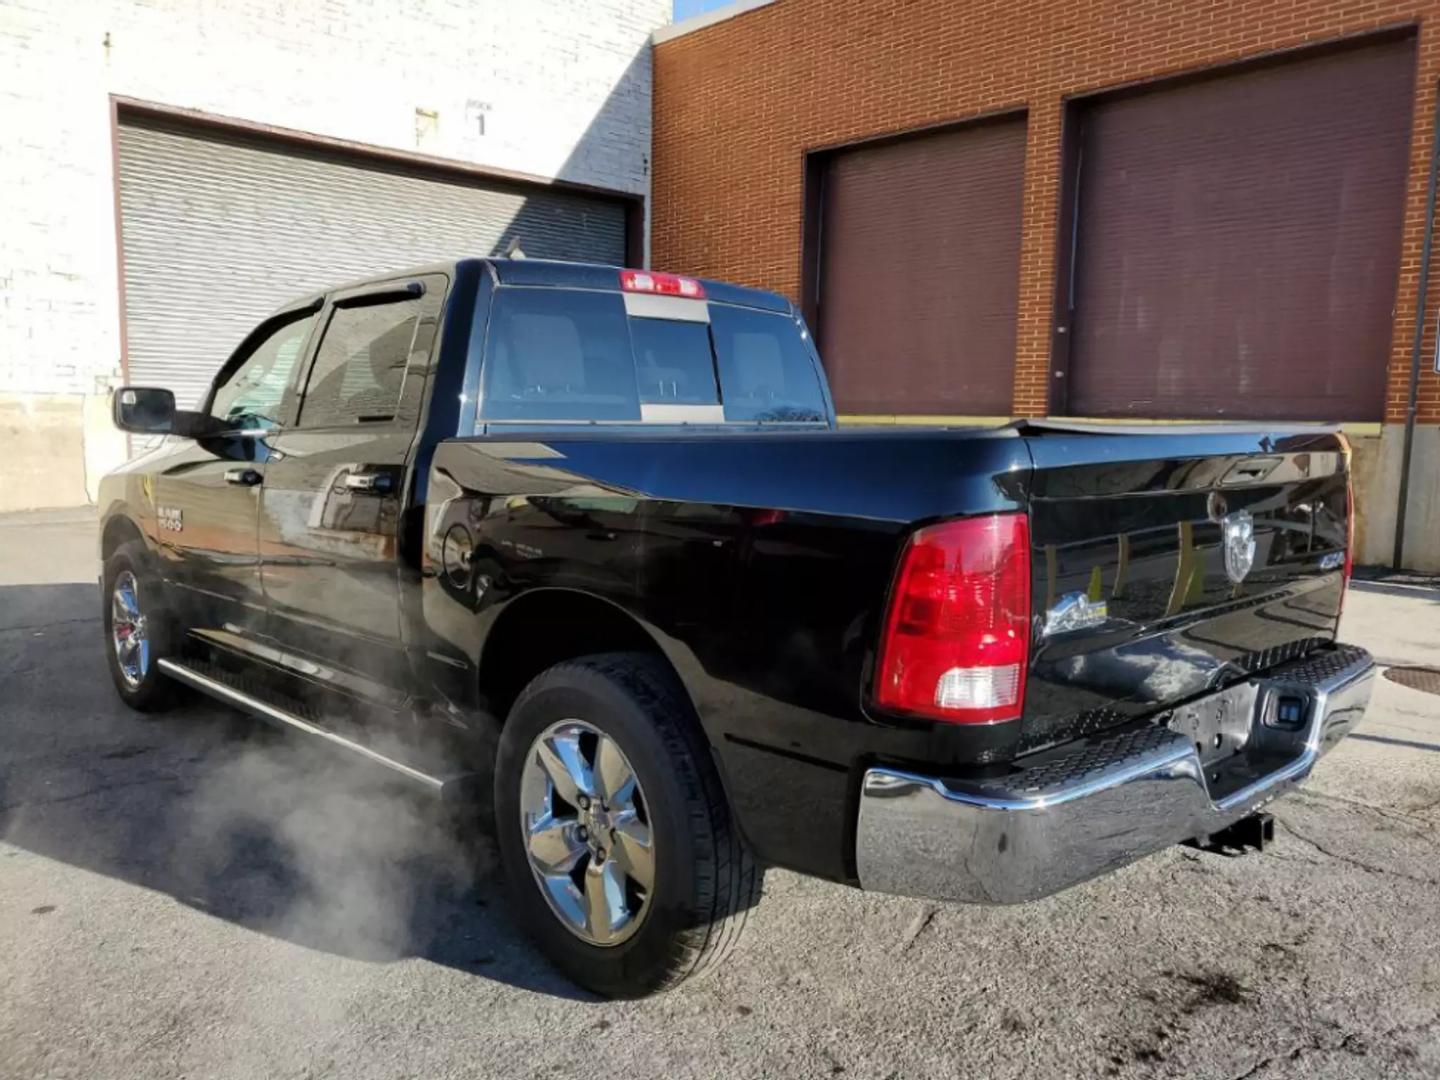 2015 RAM 1500 CREW CAB $999 DOWN & DRIVE IN 1 HOUR!